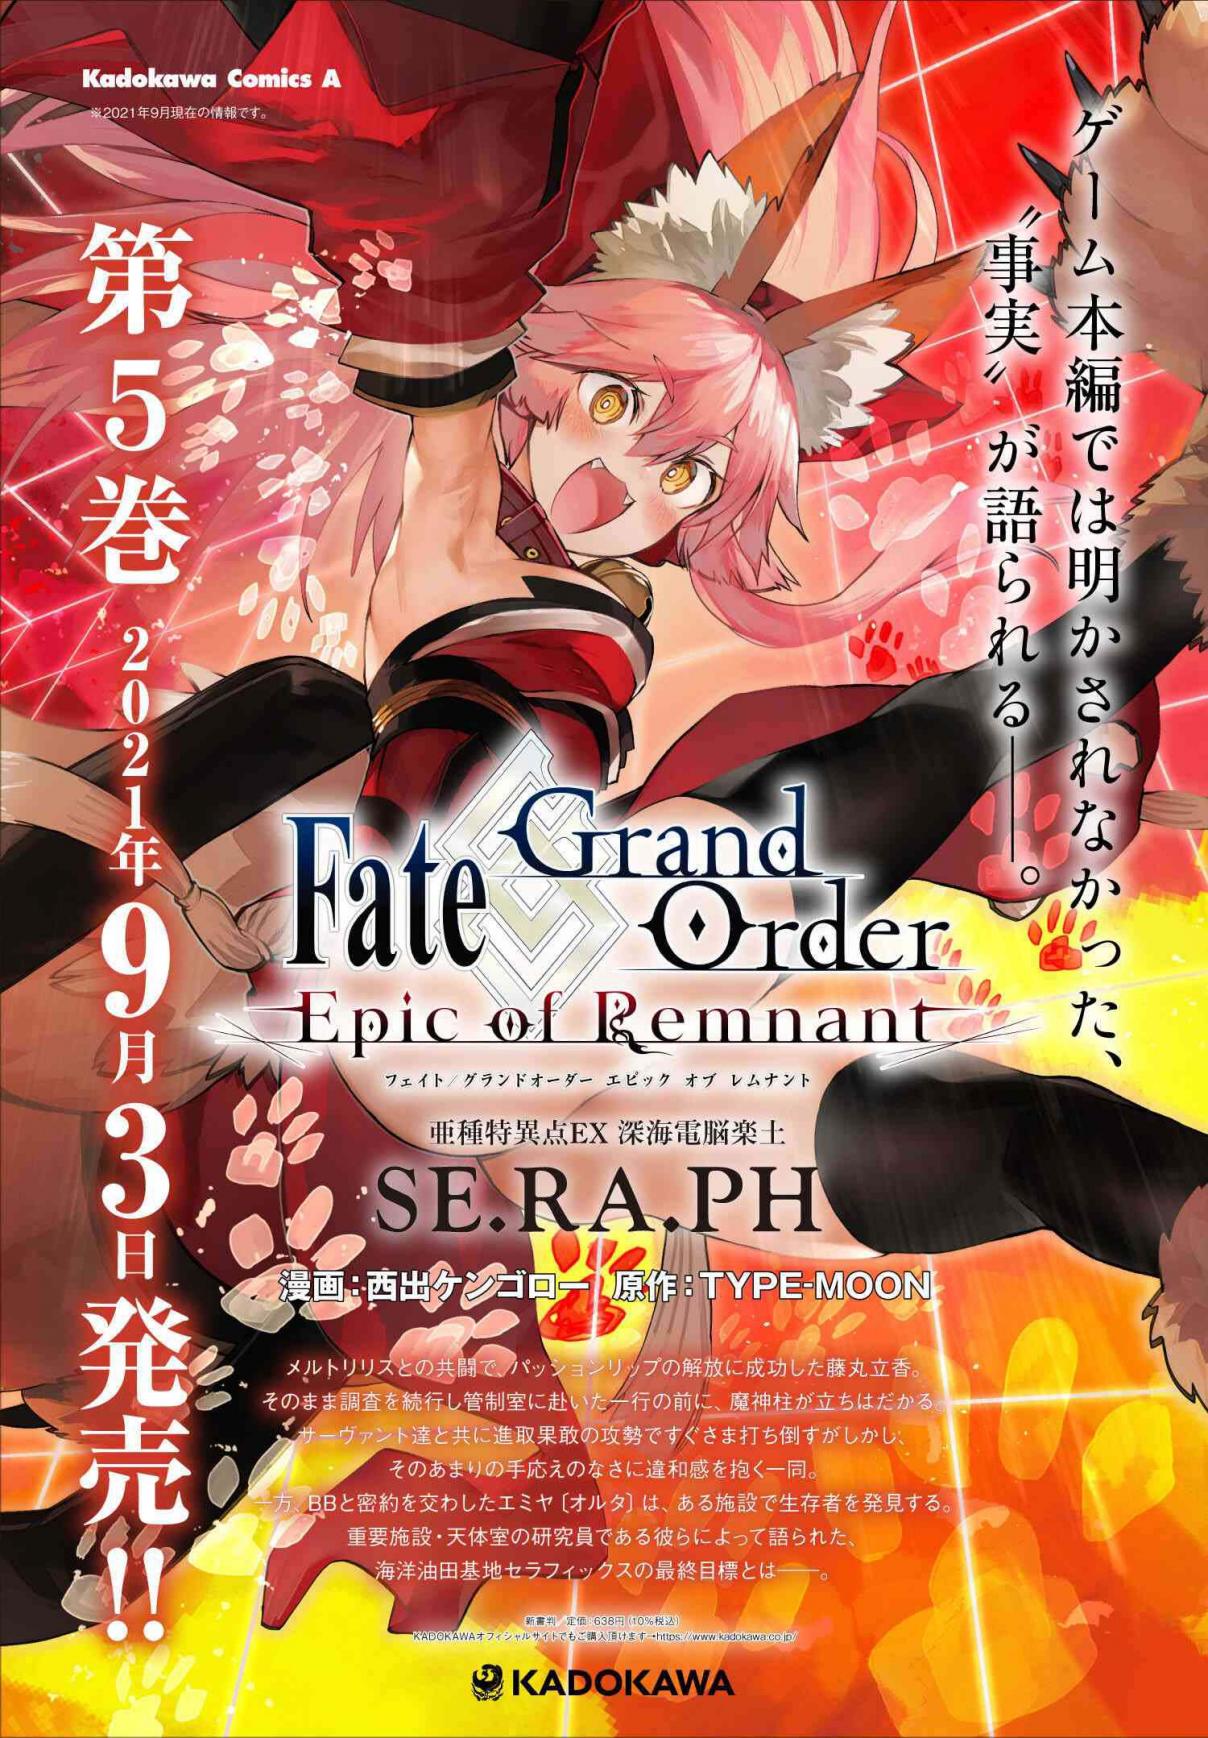 Fate/Grand Order: Epic of Remnant - Deep Sea Cyber-Paradise SE.RA.PH 26.2